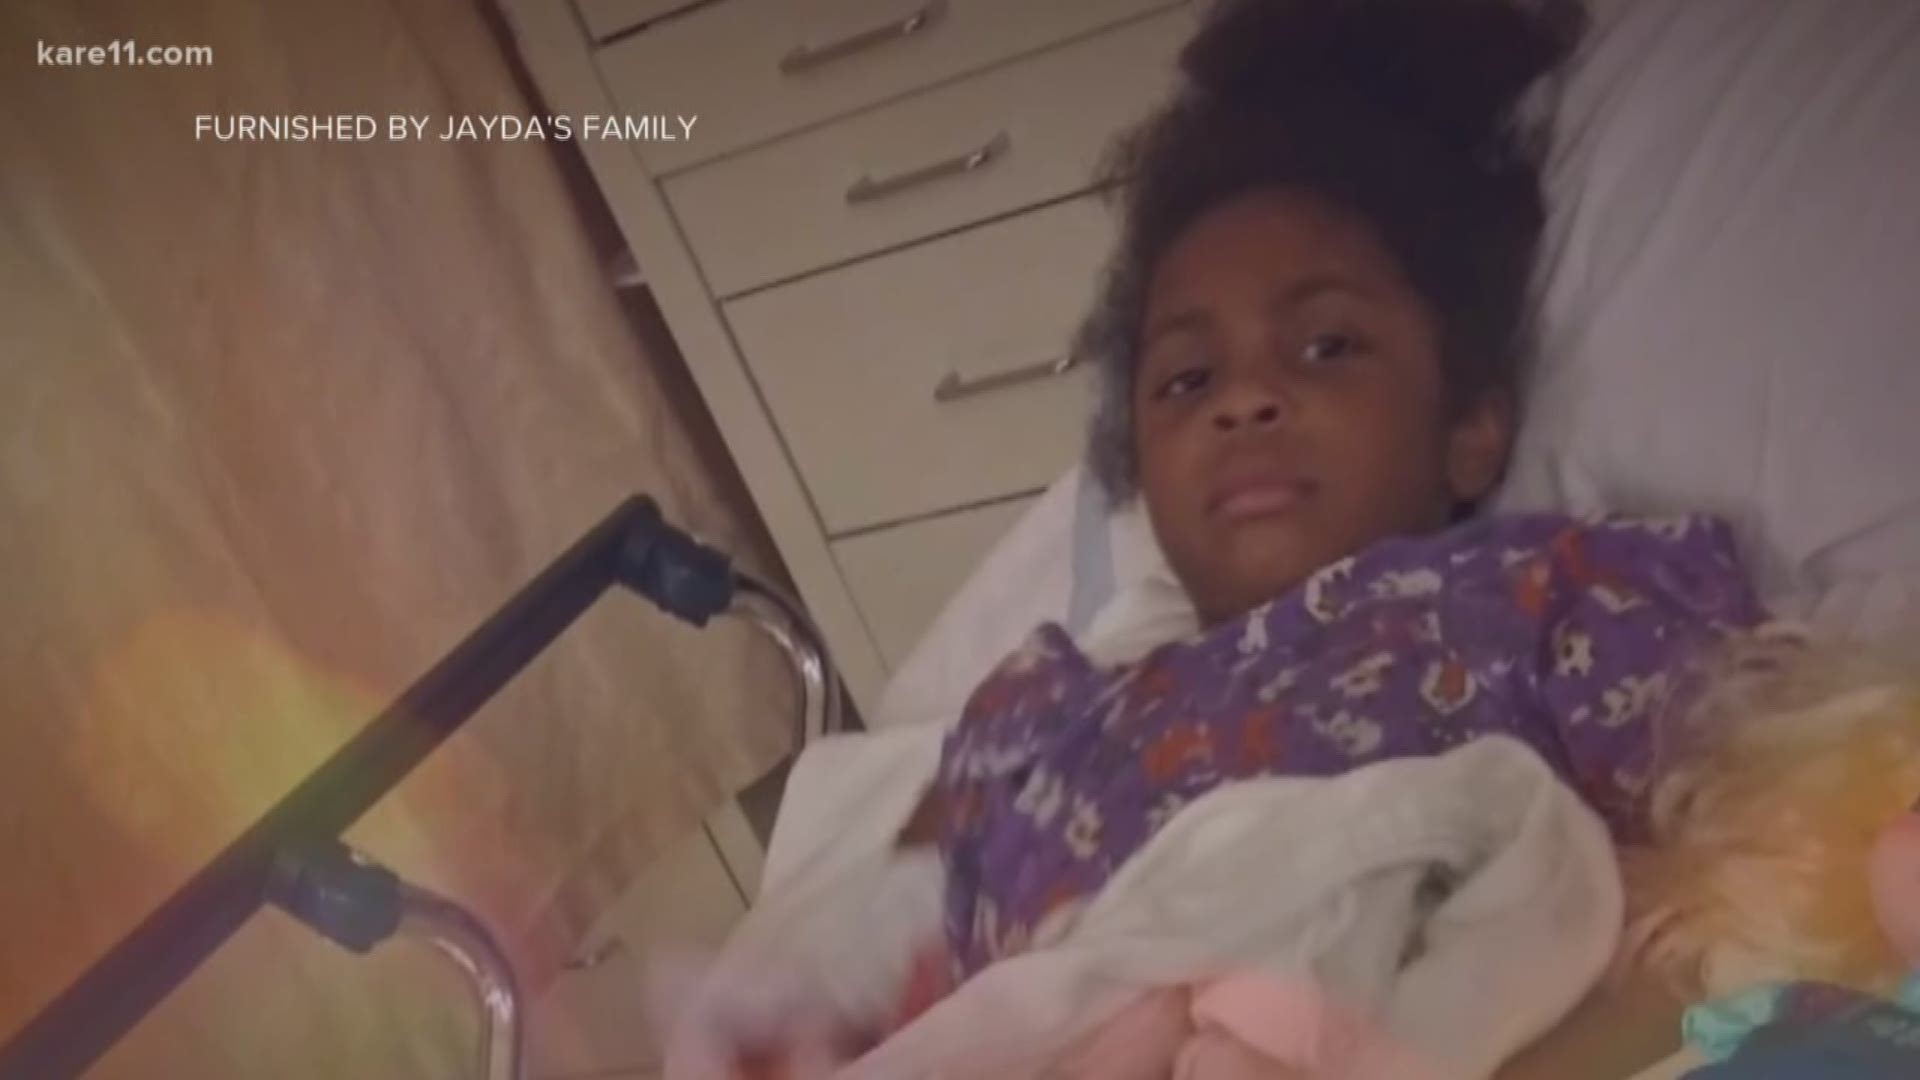 A 5-year-old is recovering after being hit by a stray bullet on the north side of Minneapolis early Monday.